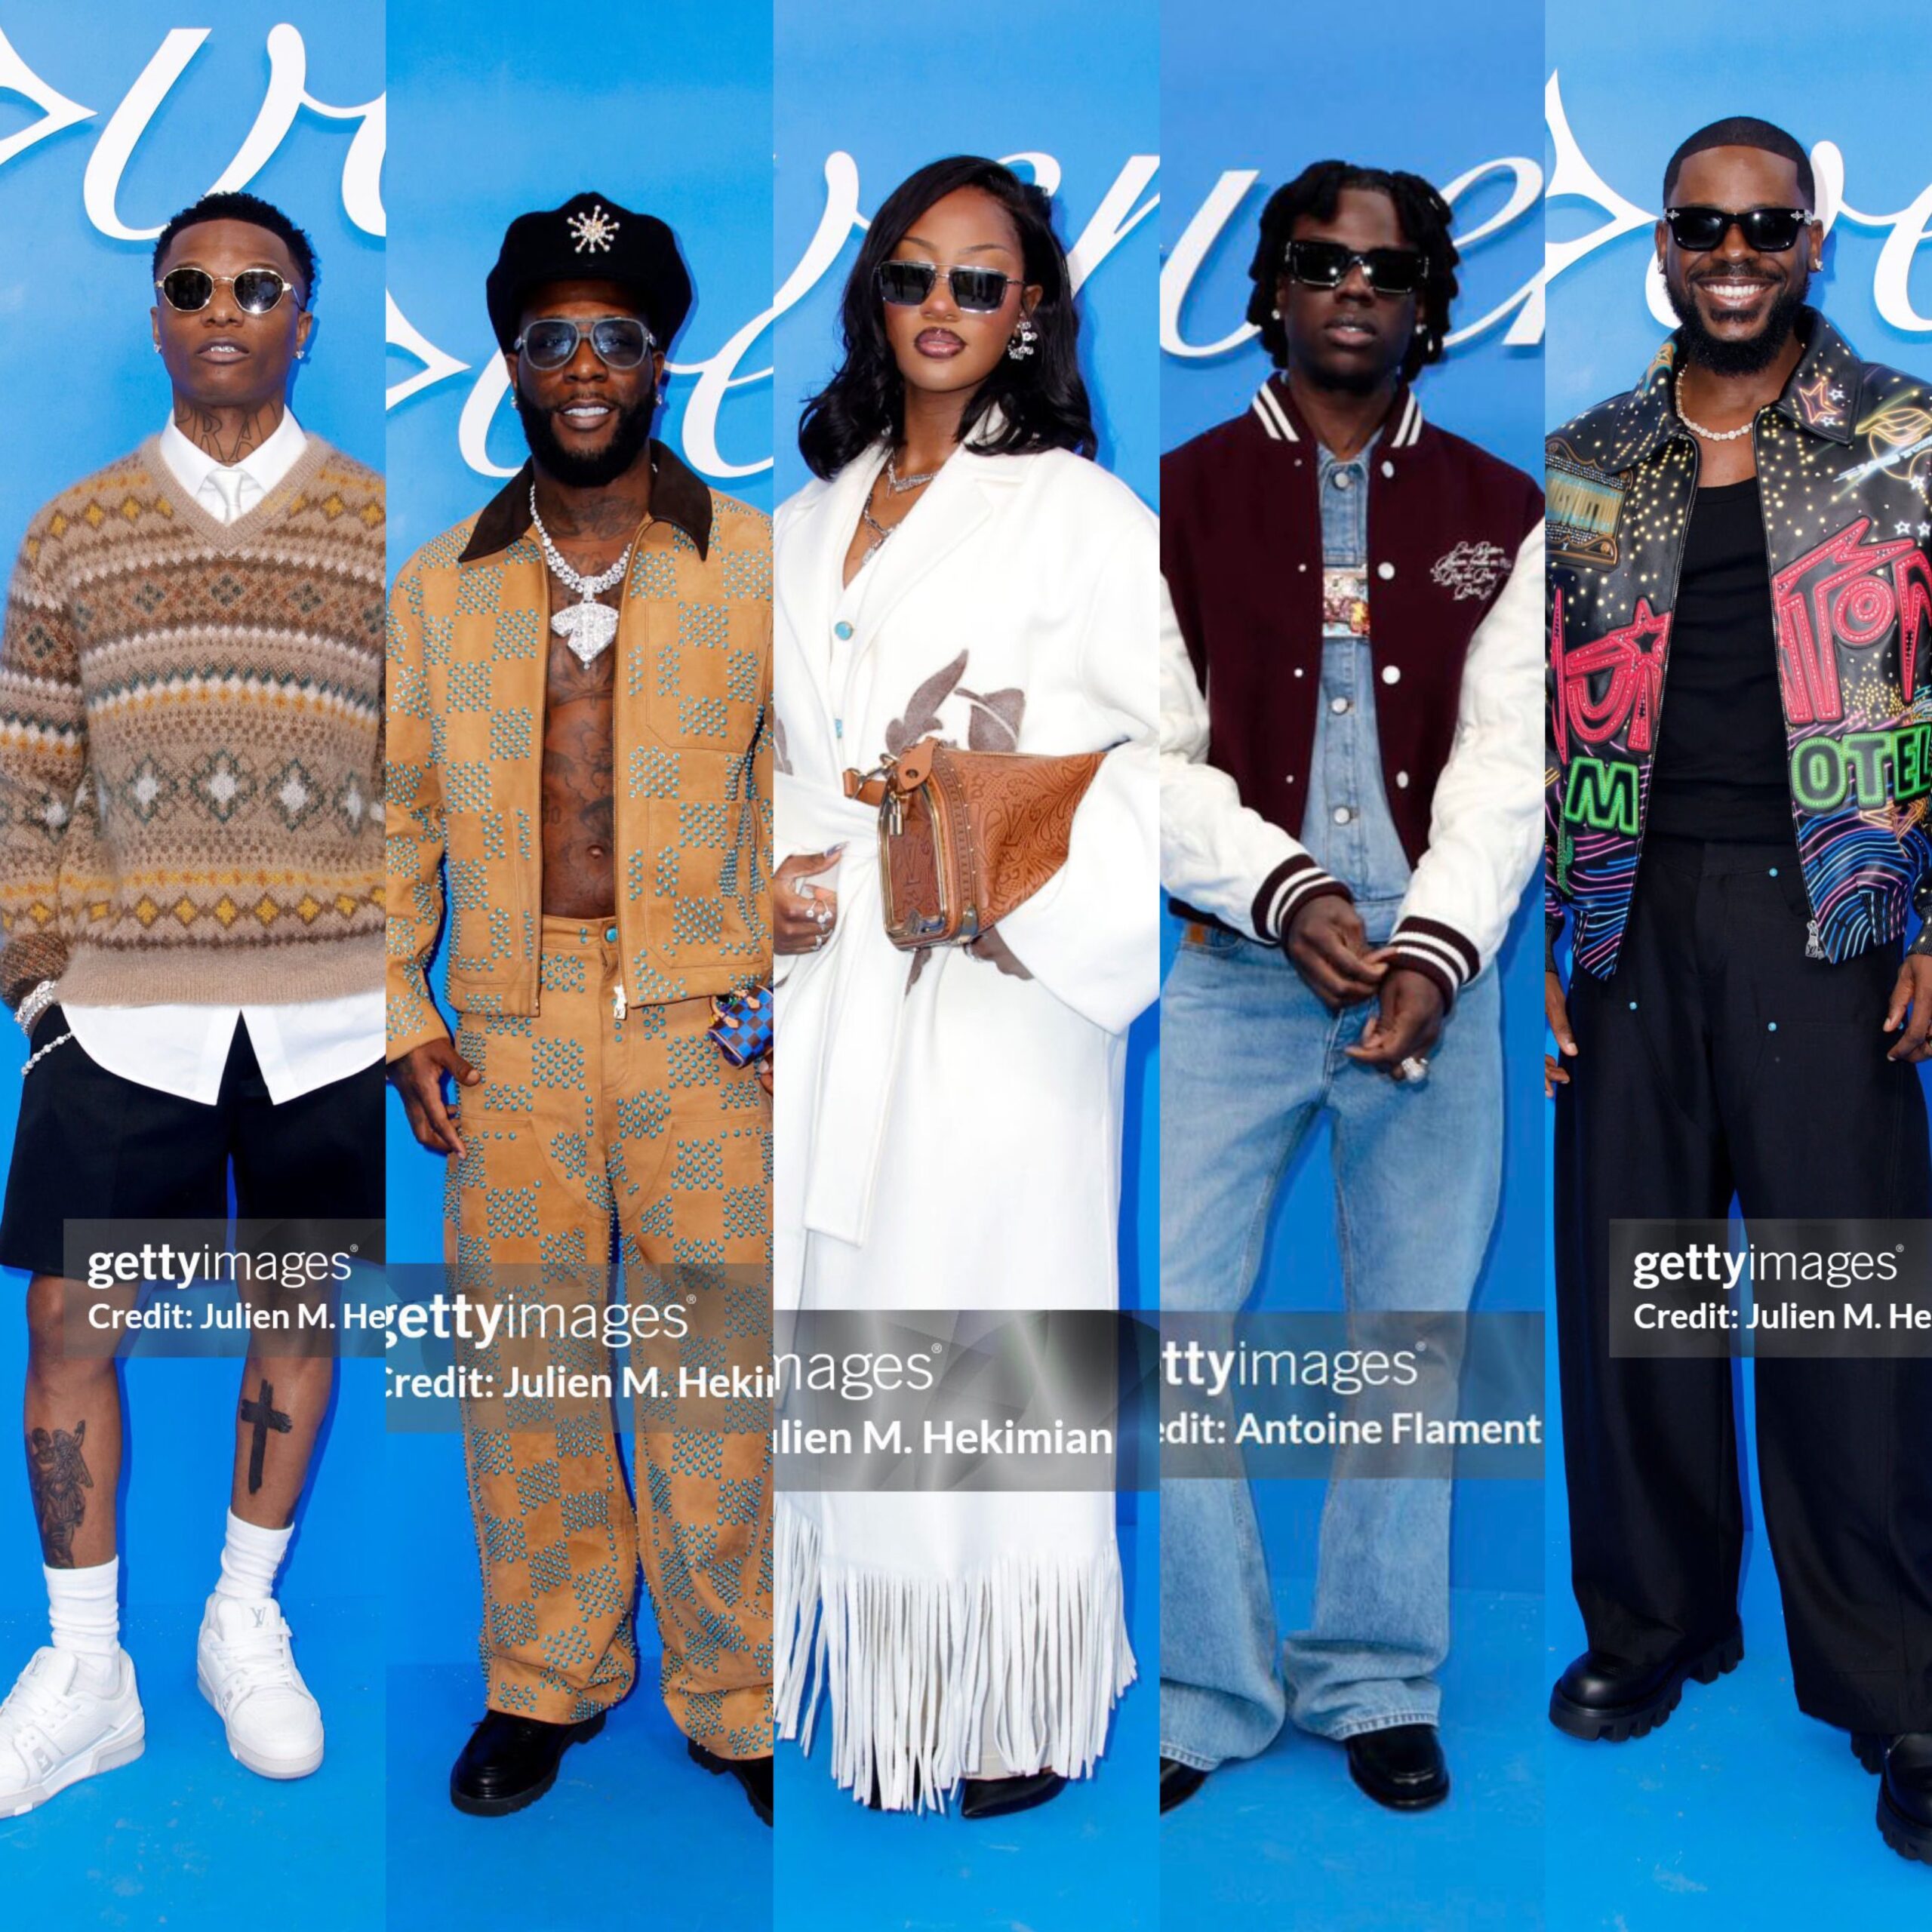 African Music Royalty Stuns at Pharrell Williams’ Louis Vuitton Show in Paris